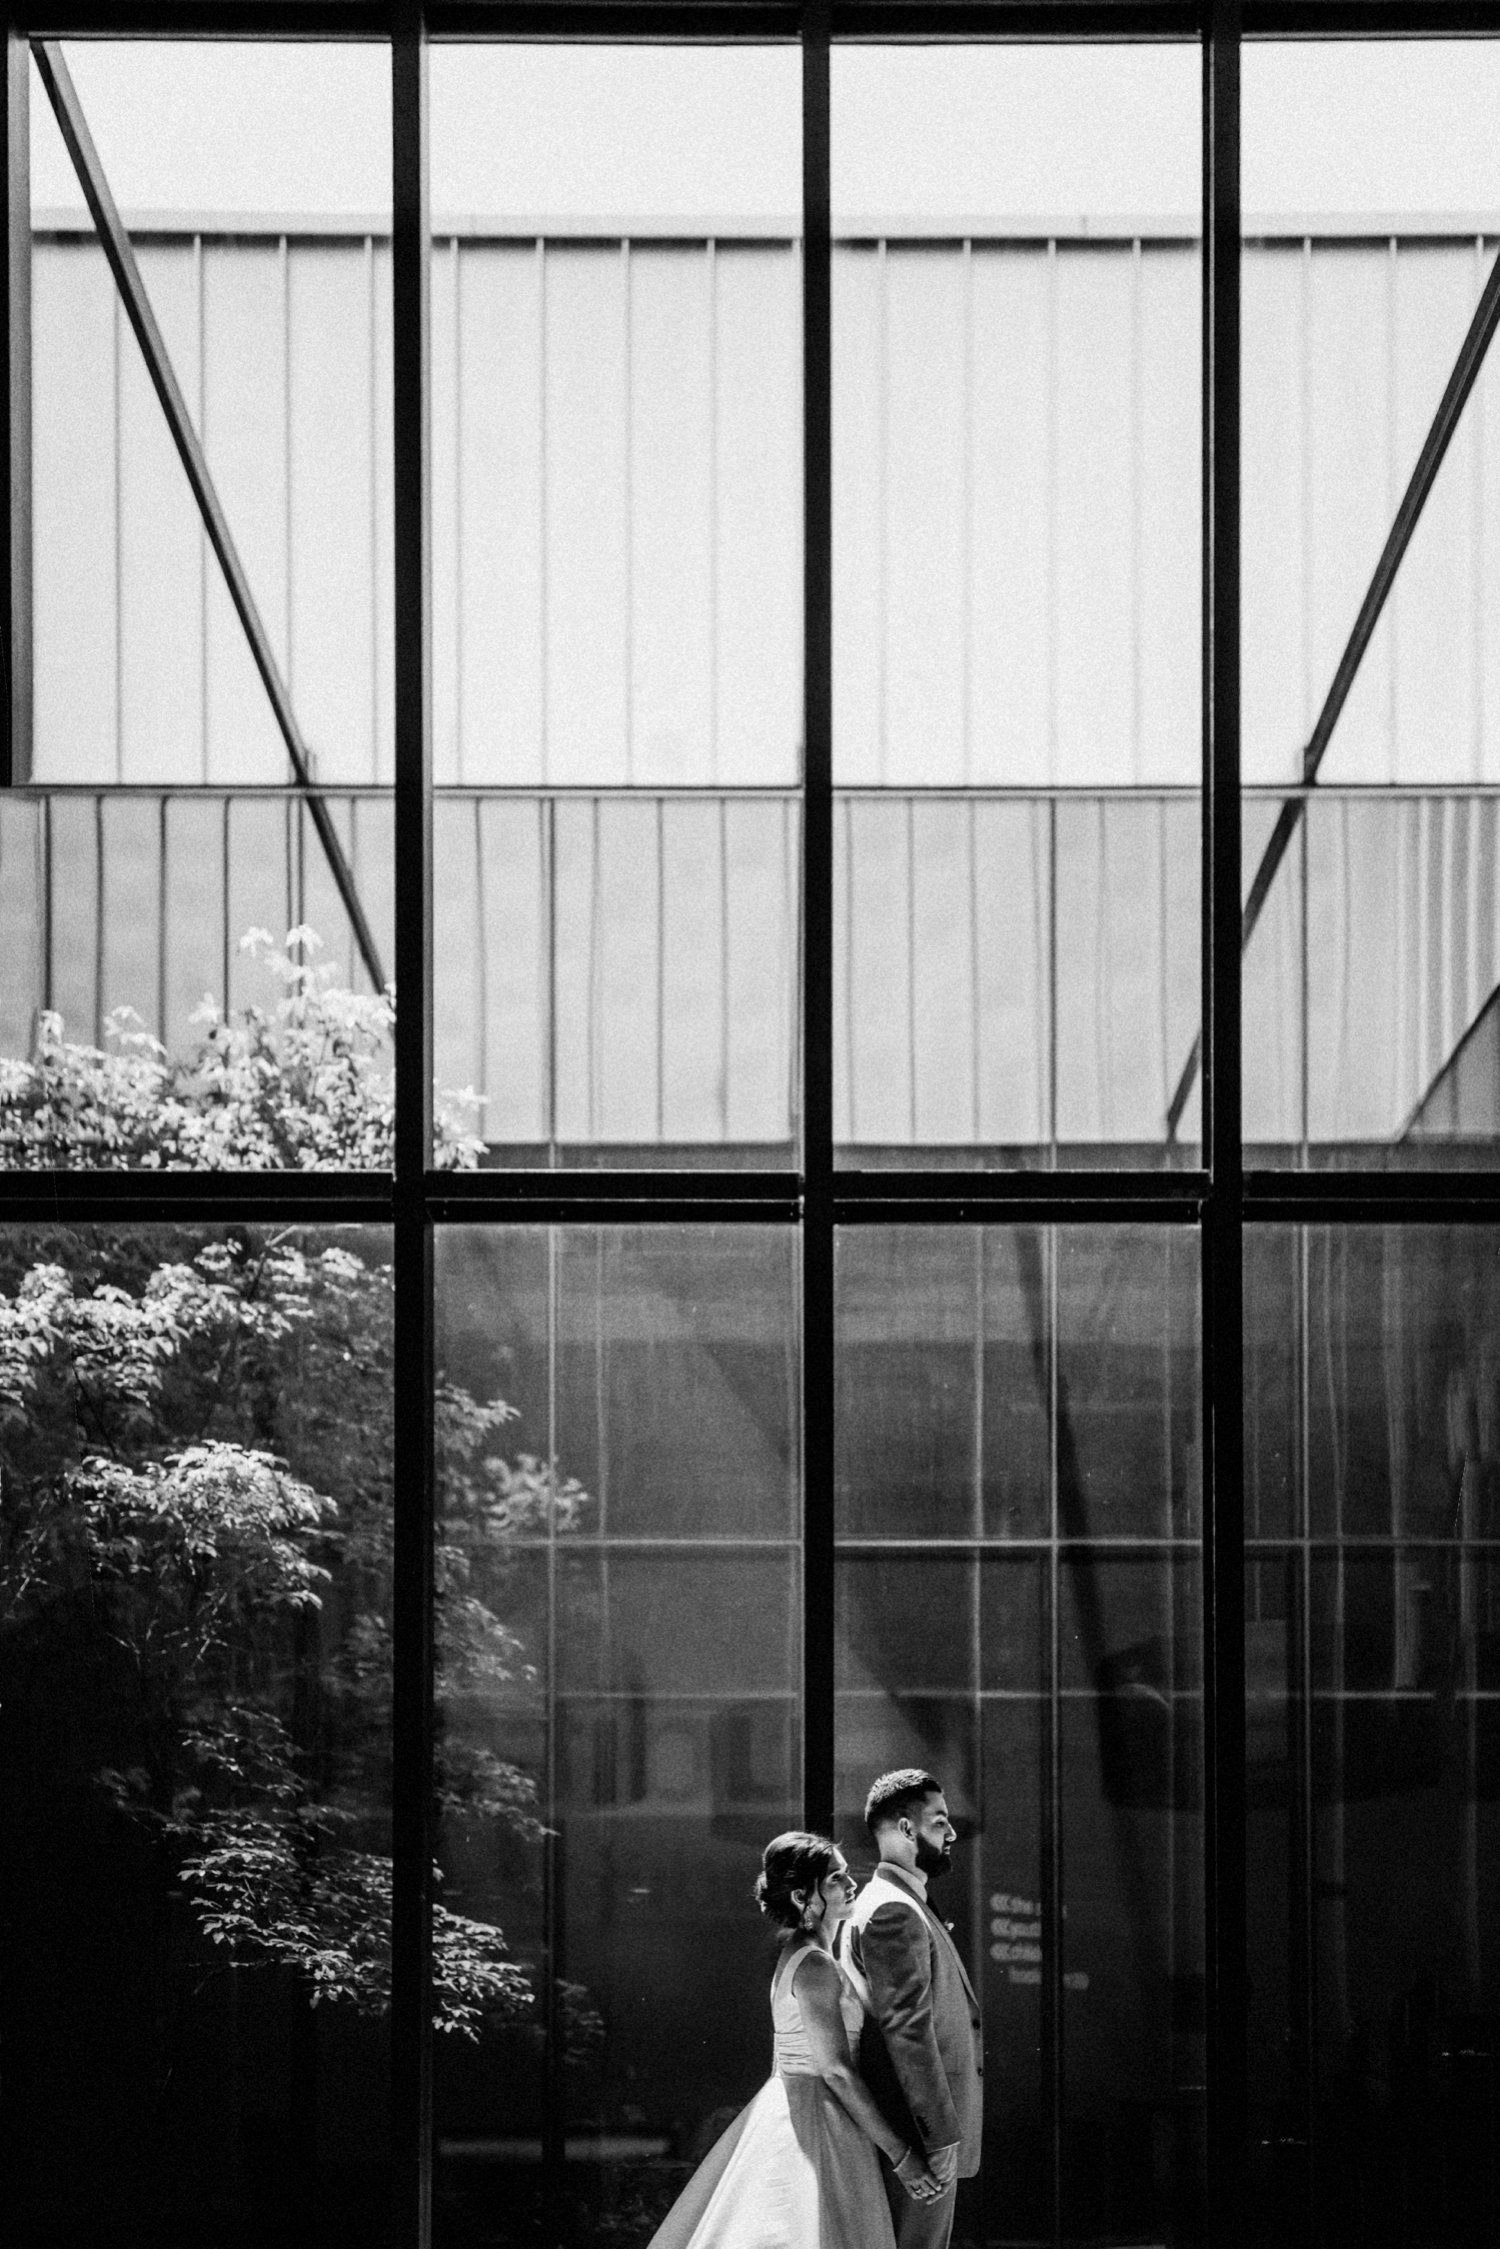  images by feliciathephotographer.com | destination wedding photographer | kansas city | spring time | pre ceremony | contrast | black and white | blooming trees | satin a line gown | davids bridal | grey suit | the black tux | 